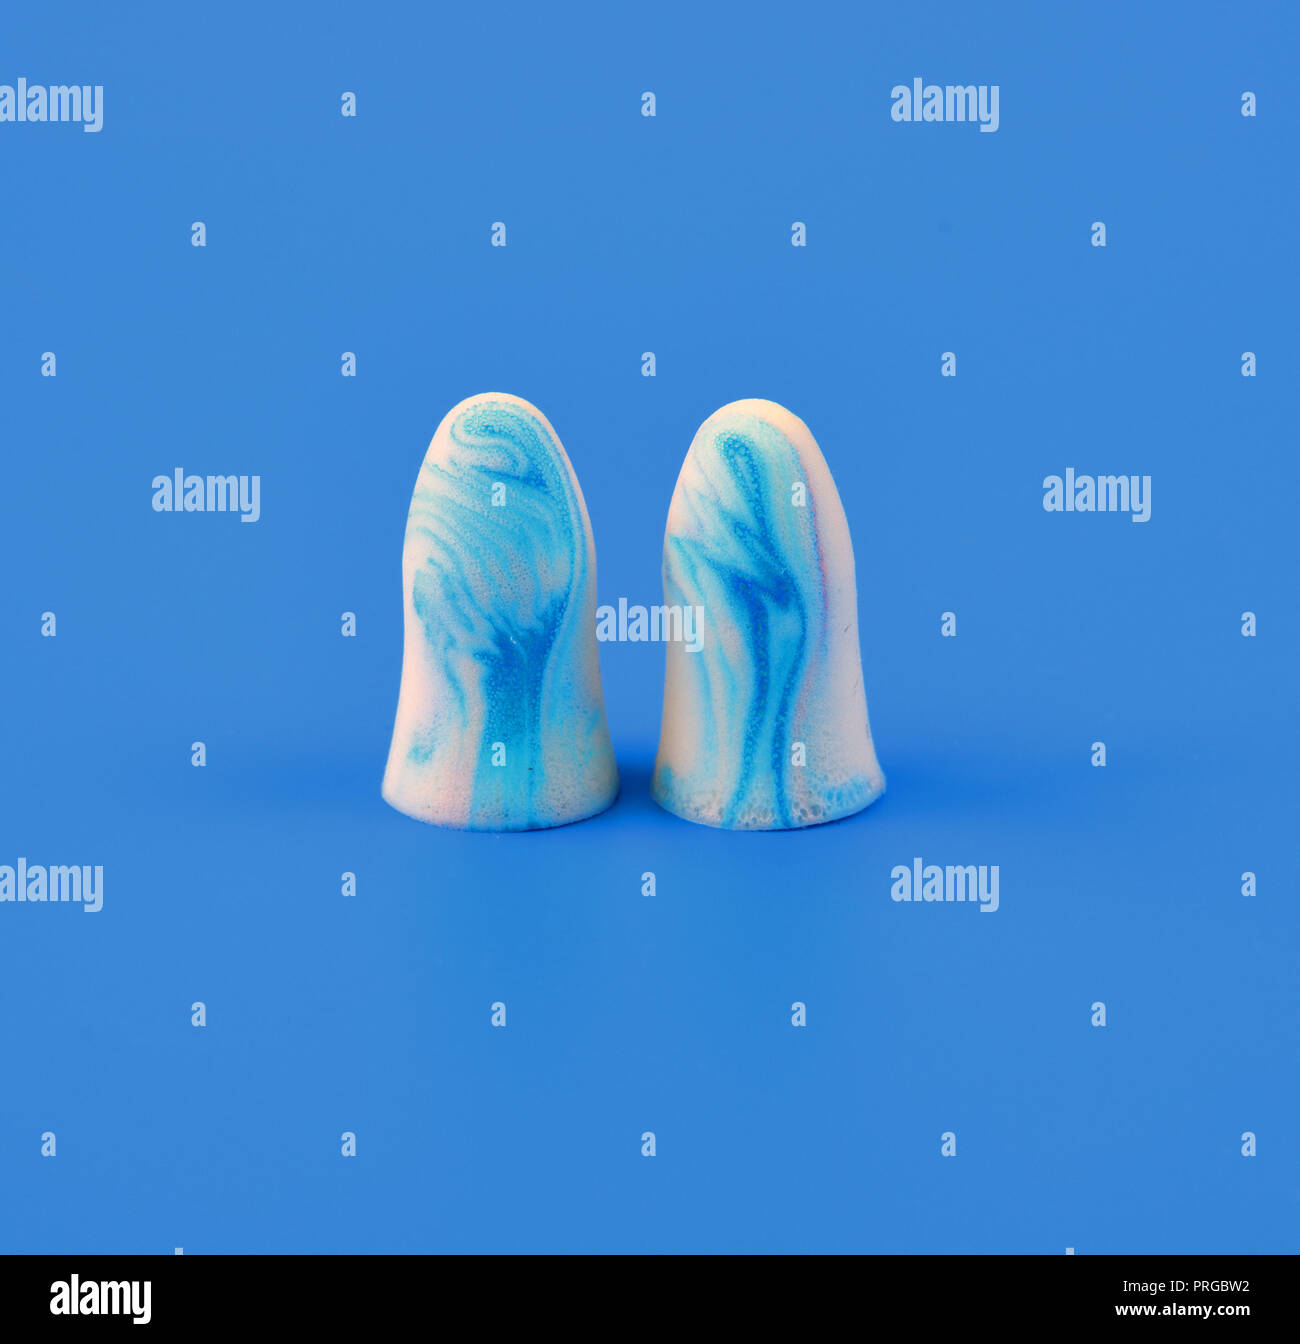 two earplugs on a blue background Stock Photo